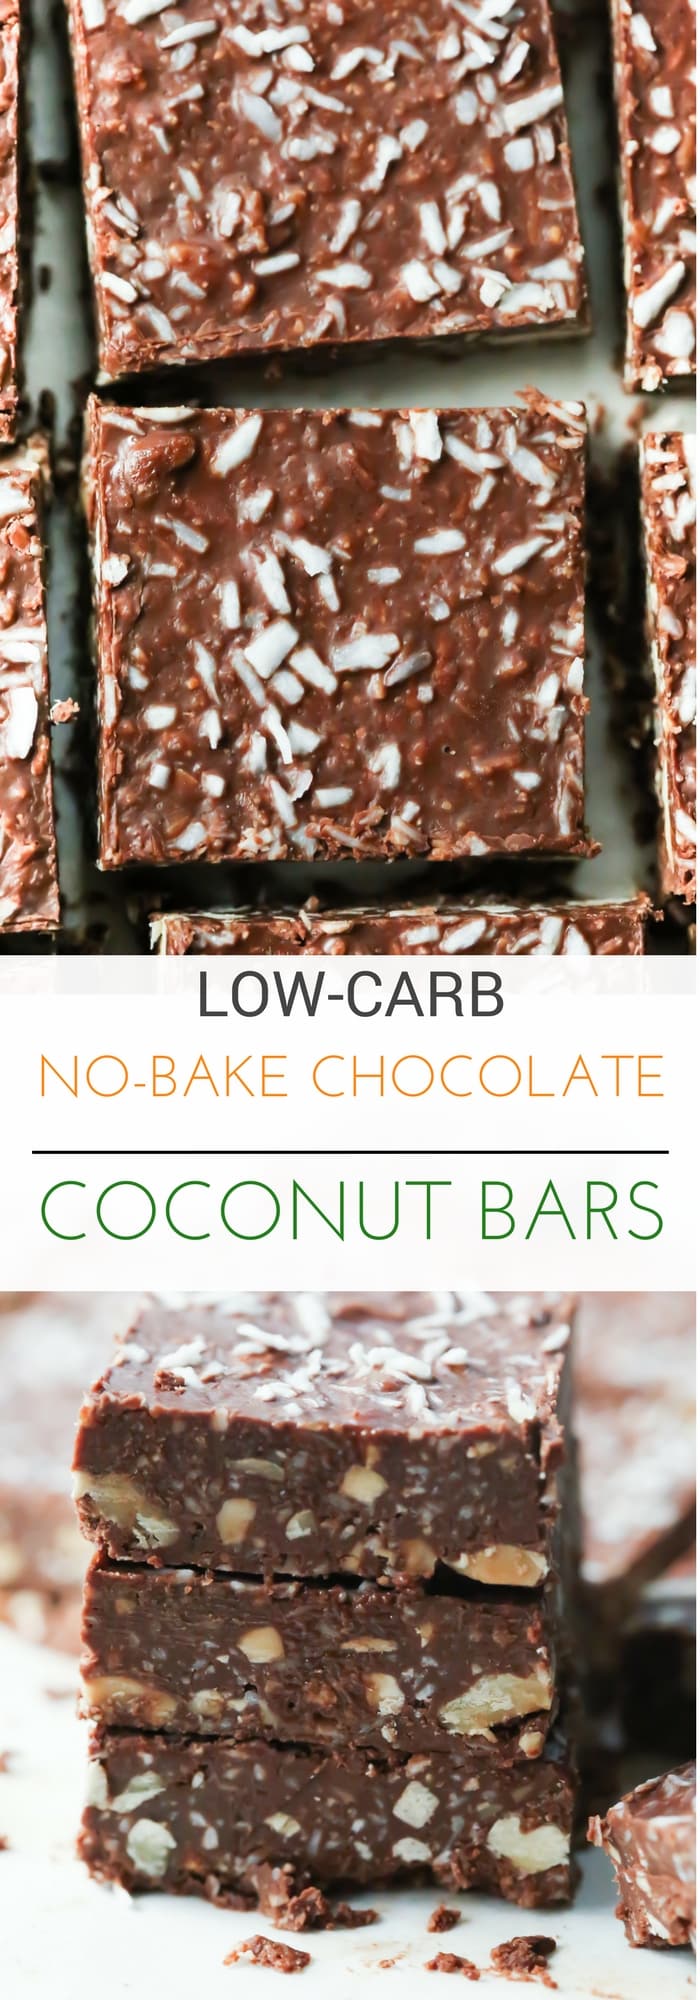 These Low-Carb No-Bake Chocolate Coconut Bars are made with walnuts, cashews, coconut, natural peanut butter and dark chocolate. It’s gluten-free and very delicious and this bar recipe will become your favourite of all the low carb snacks!